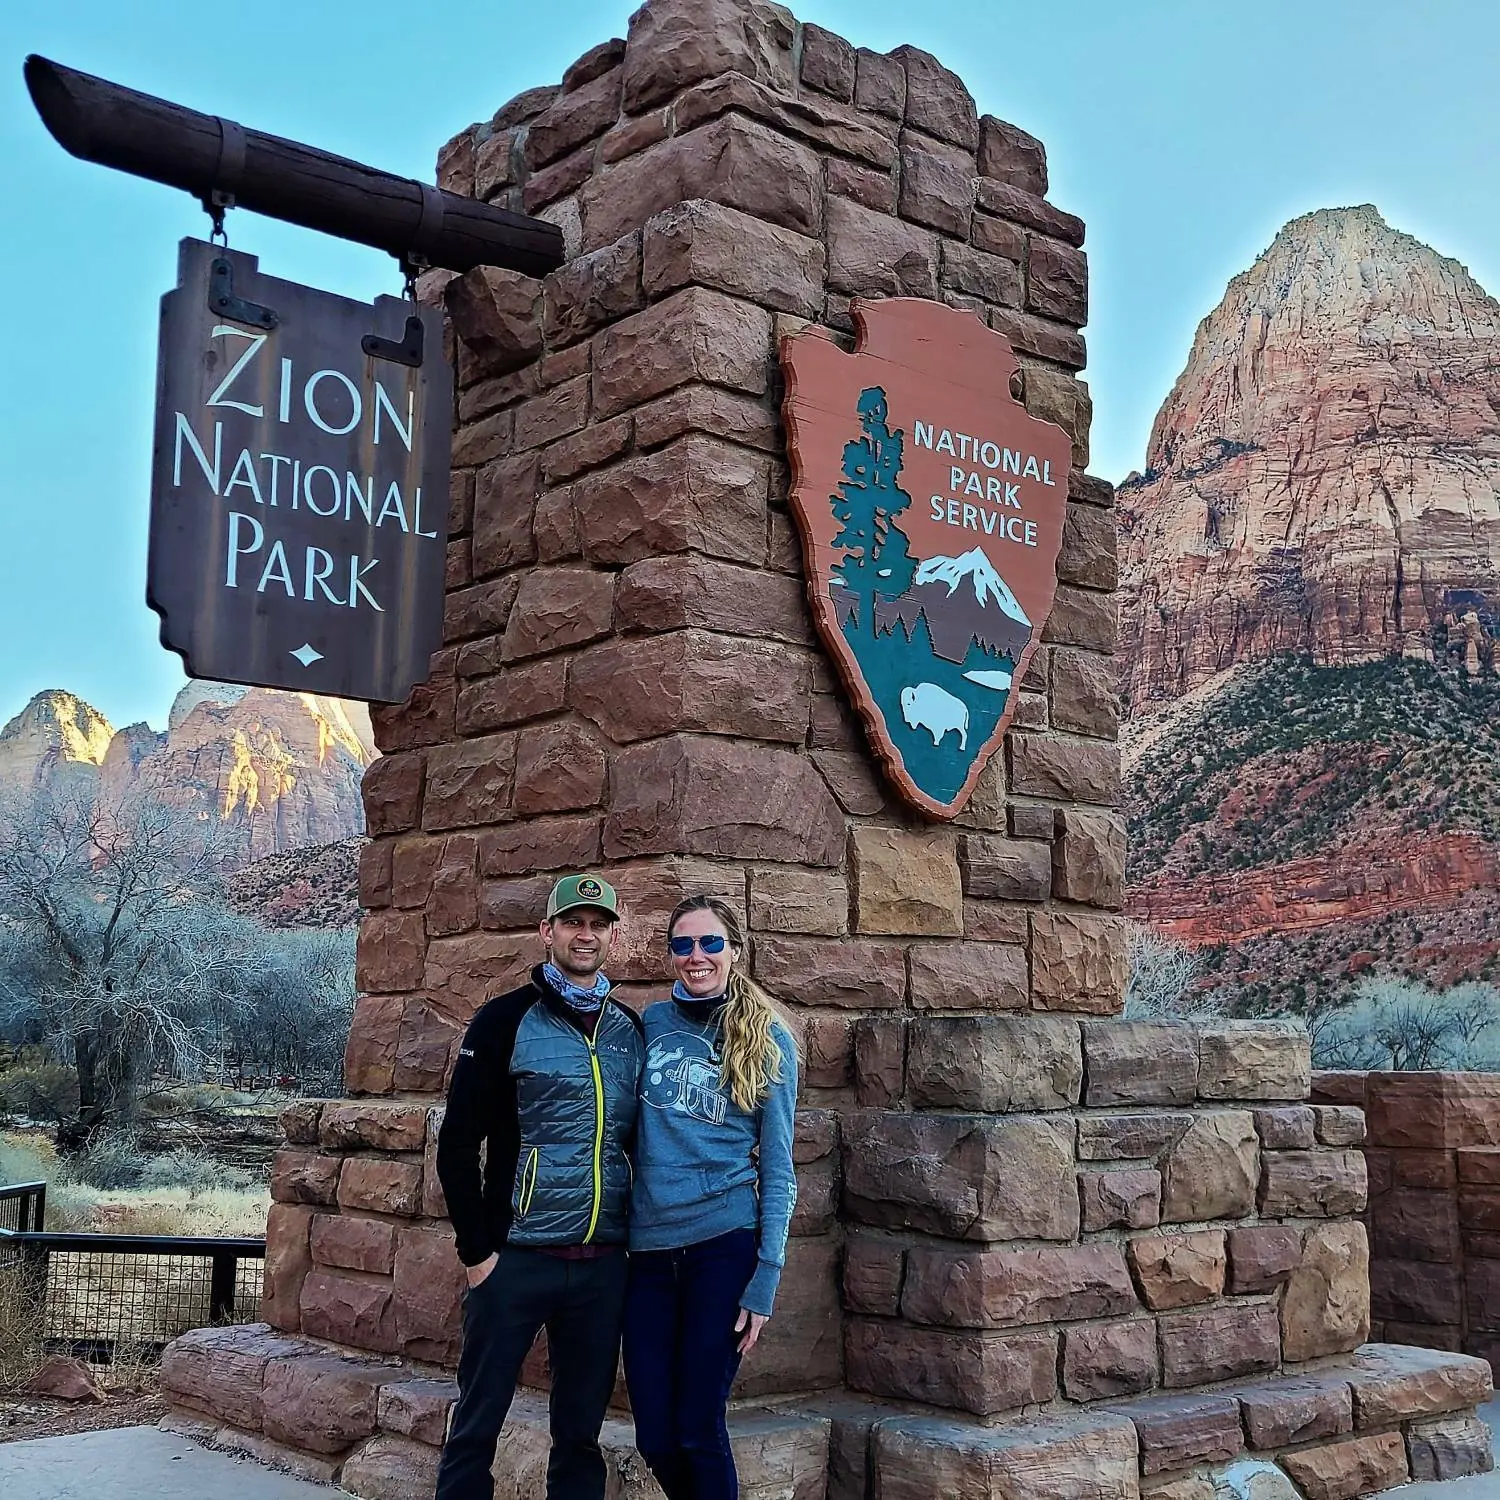 Andrew and Ashley, co-founders of Epic Today, at the entrance of Zion National Park